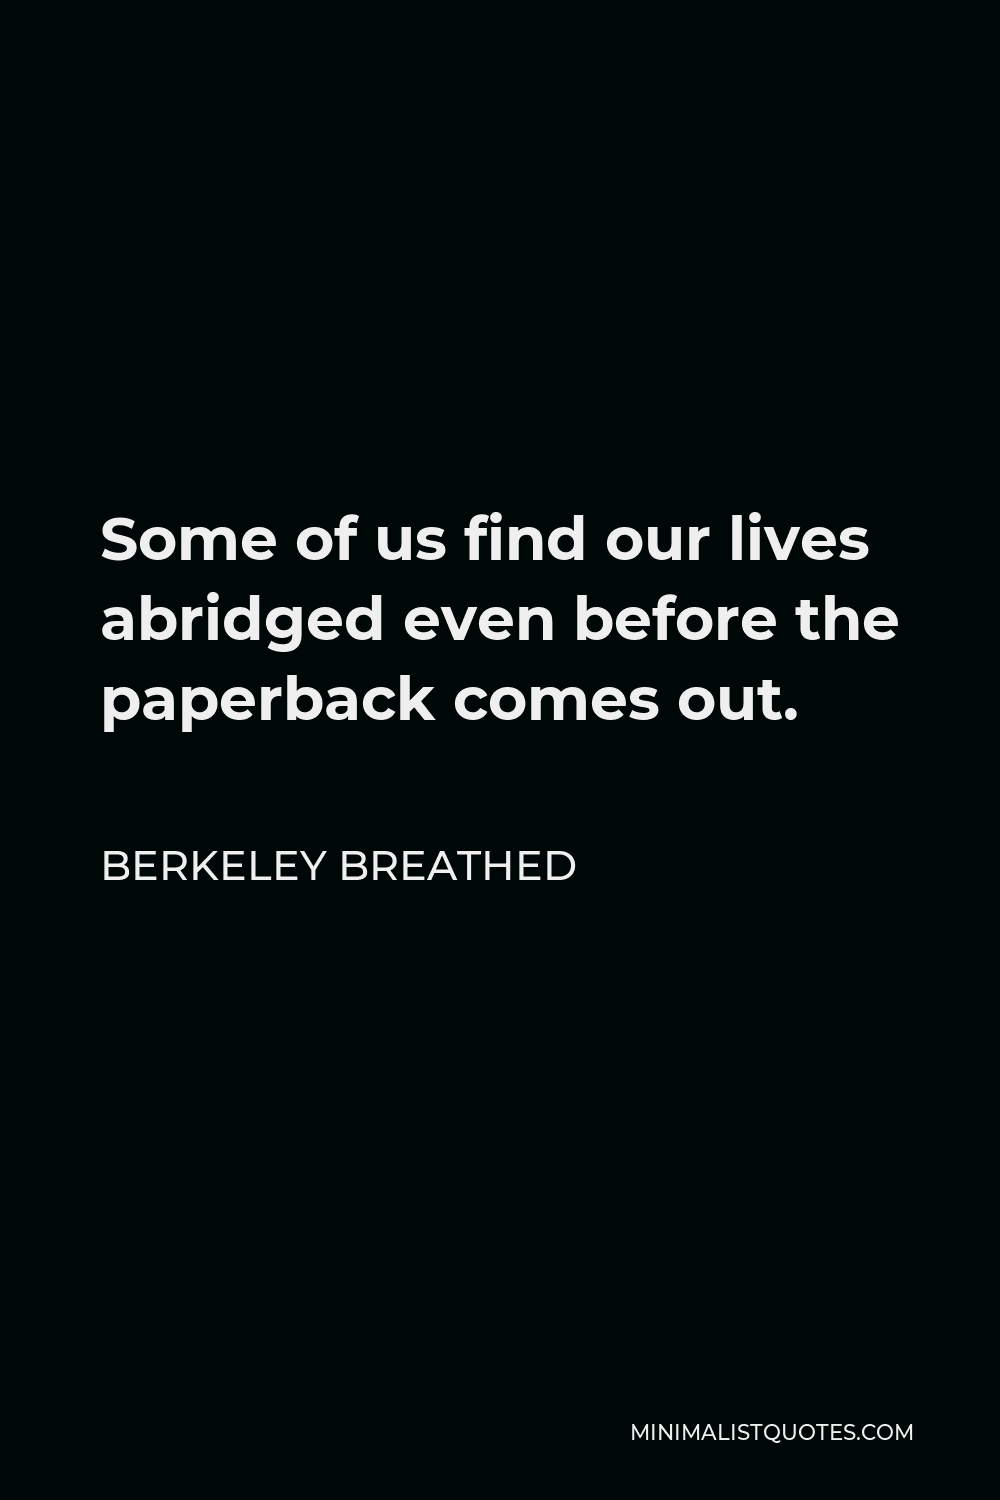 Berkeley Breathed Quote - Some of us find our lives abridged even before the paperback comes out.